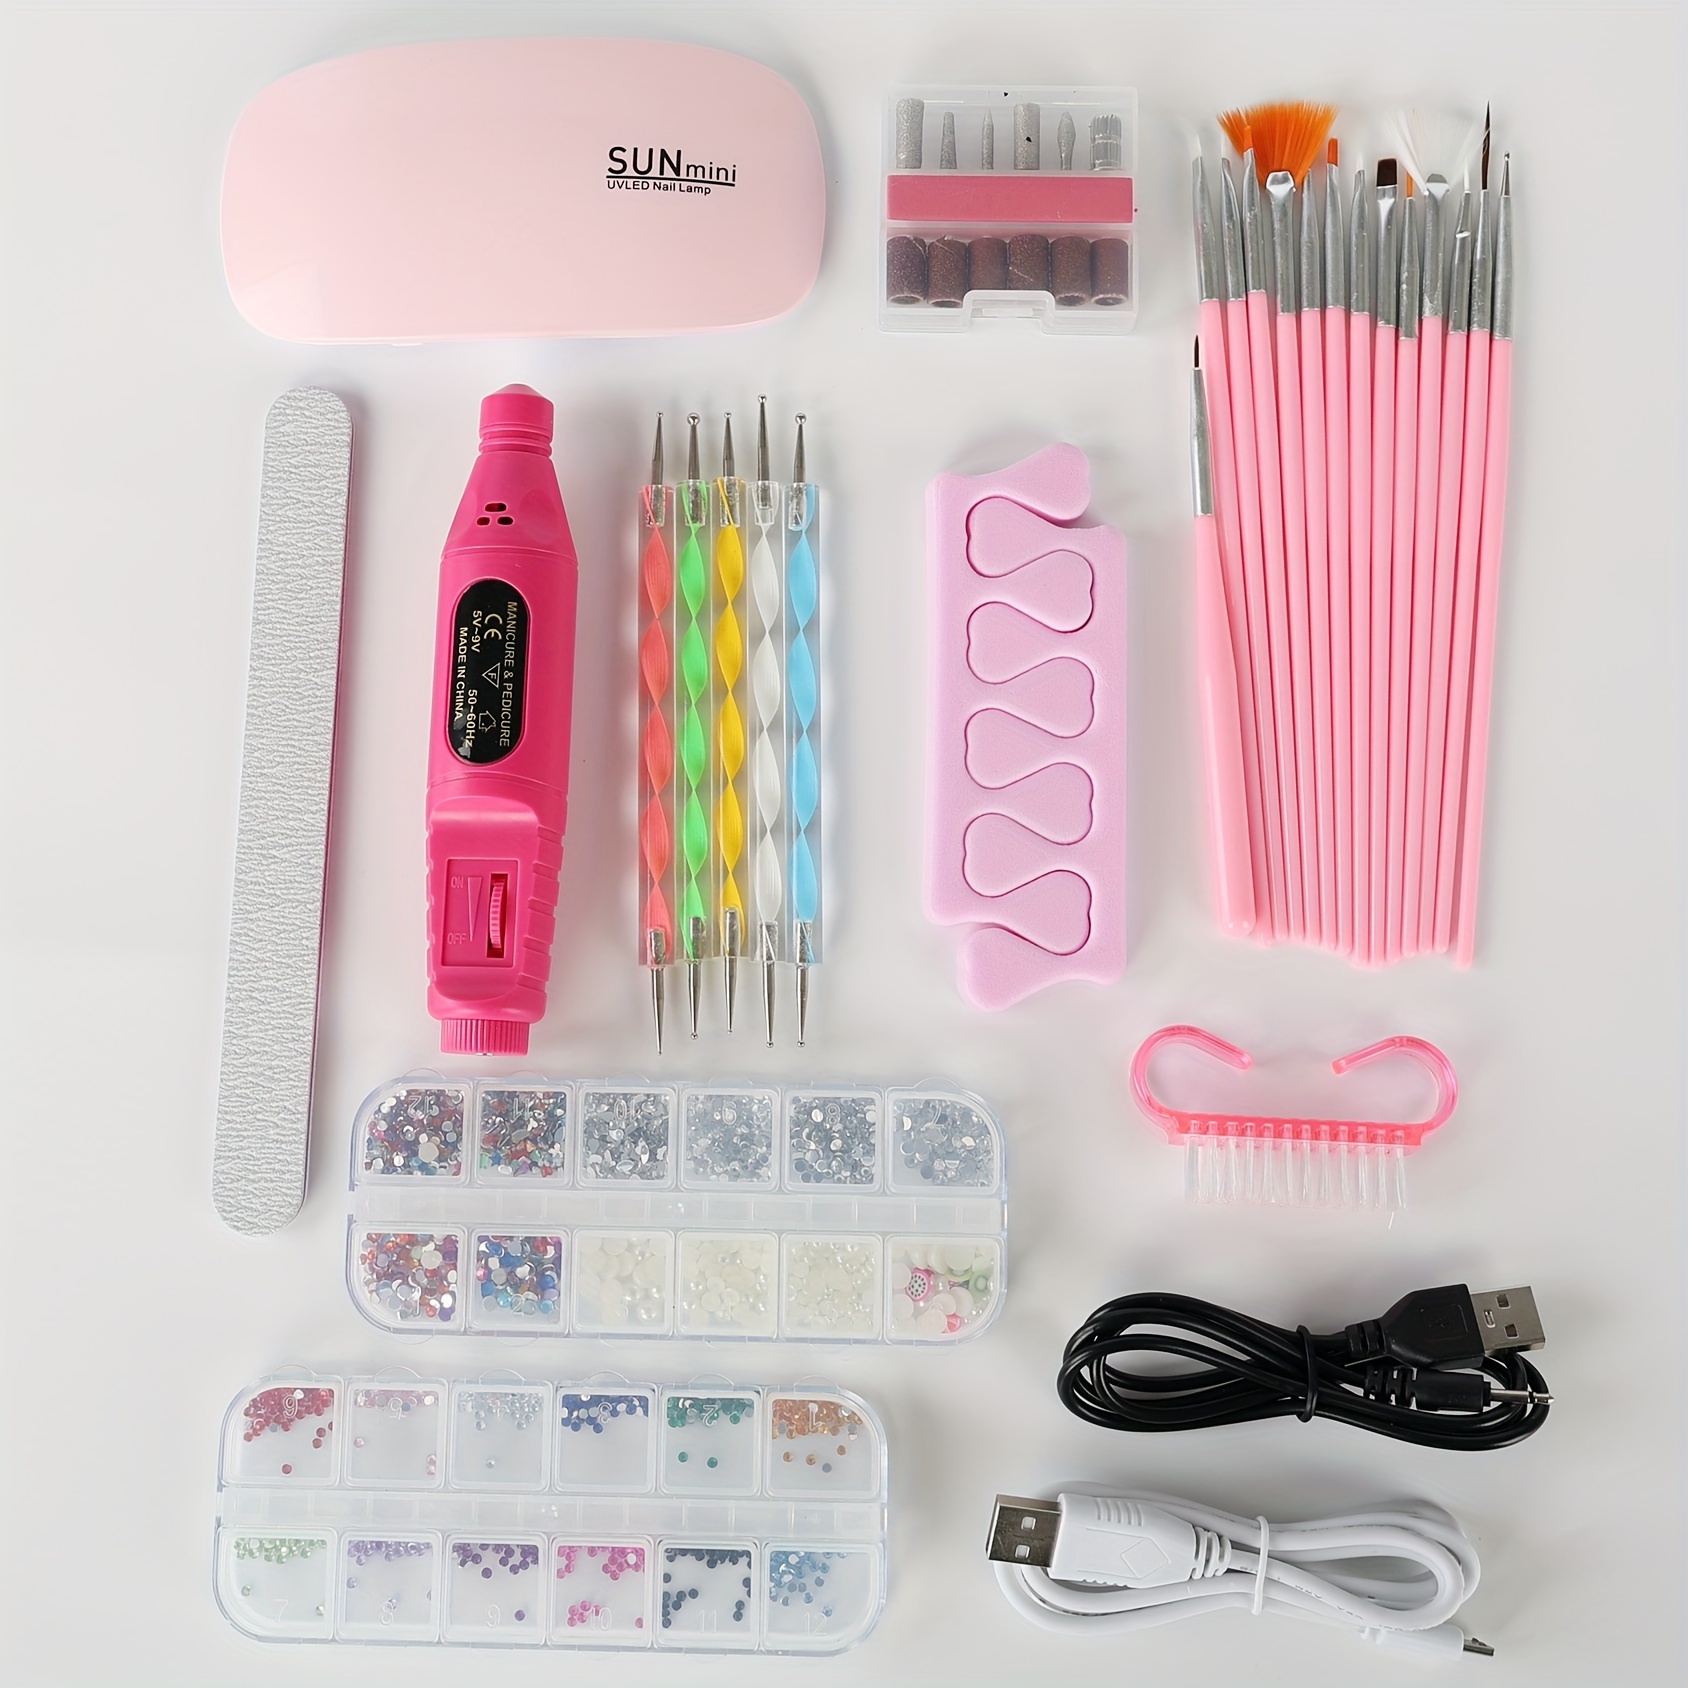 

Portable Acrylic Nail Art Kit With Led Lamp, Manicure Tool Set For Nail Art, Glue Removal & Dead Skin, Usb Powered Multi-function Nail Drill, Brushes & Decoration Accessories